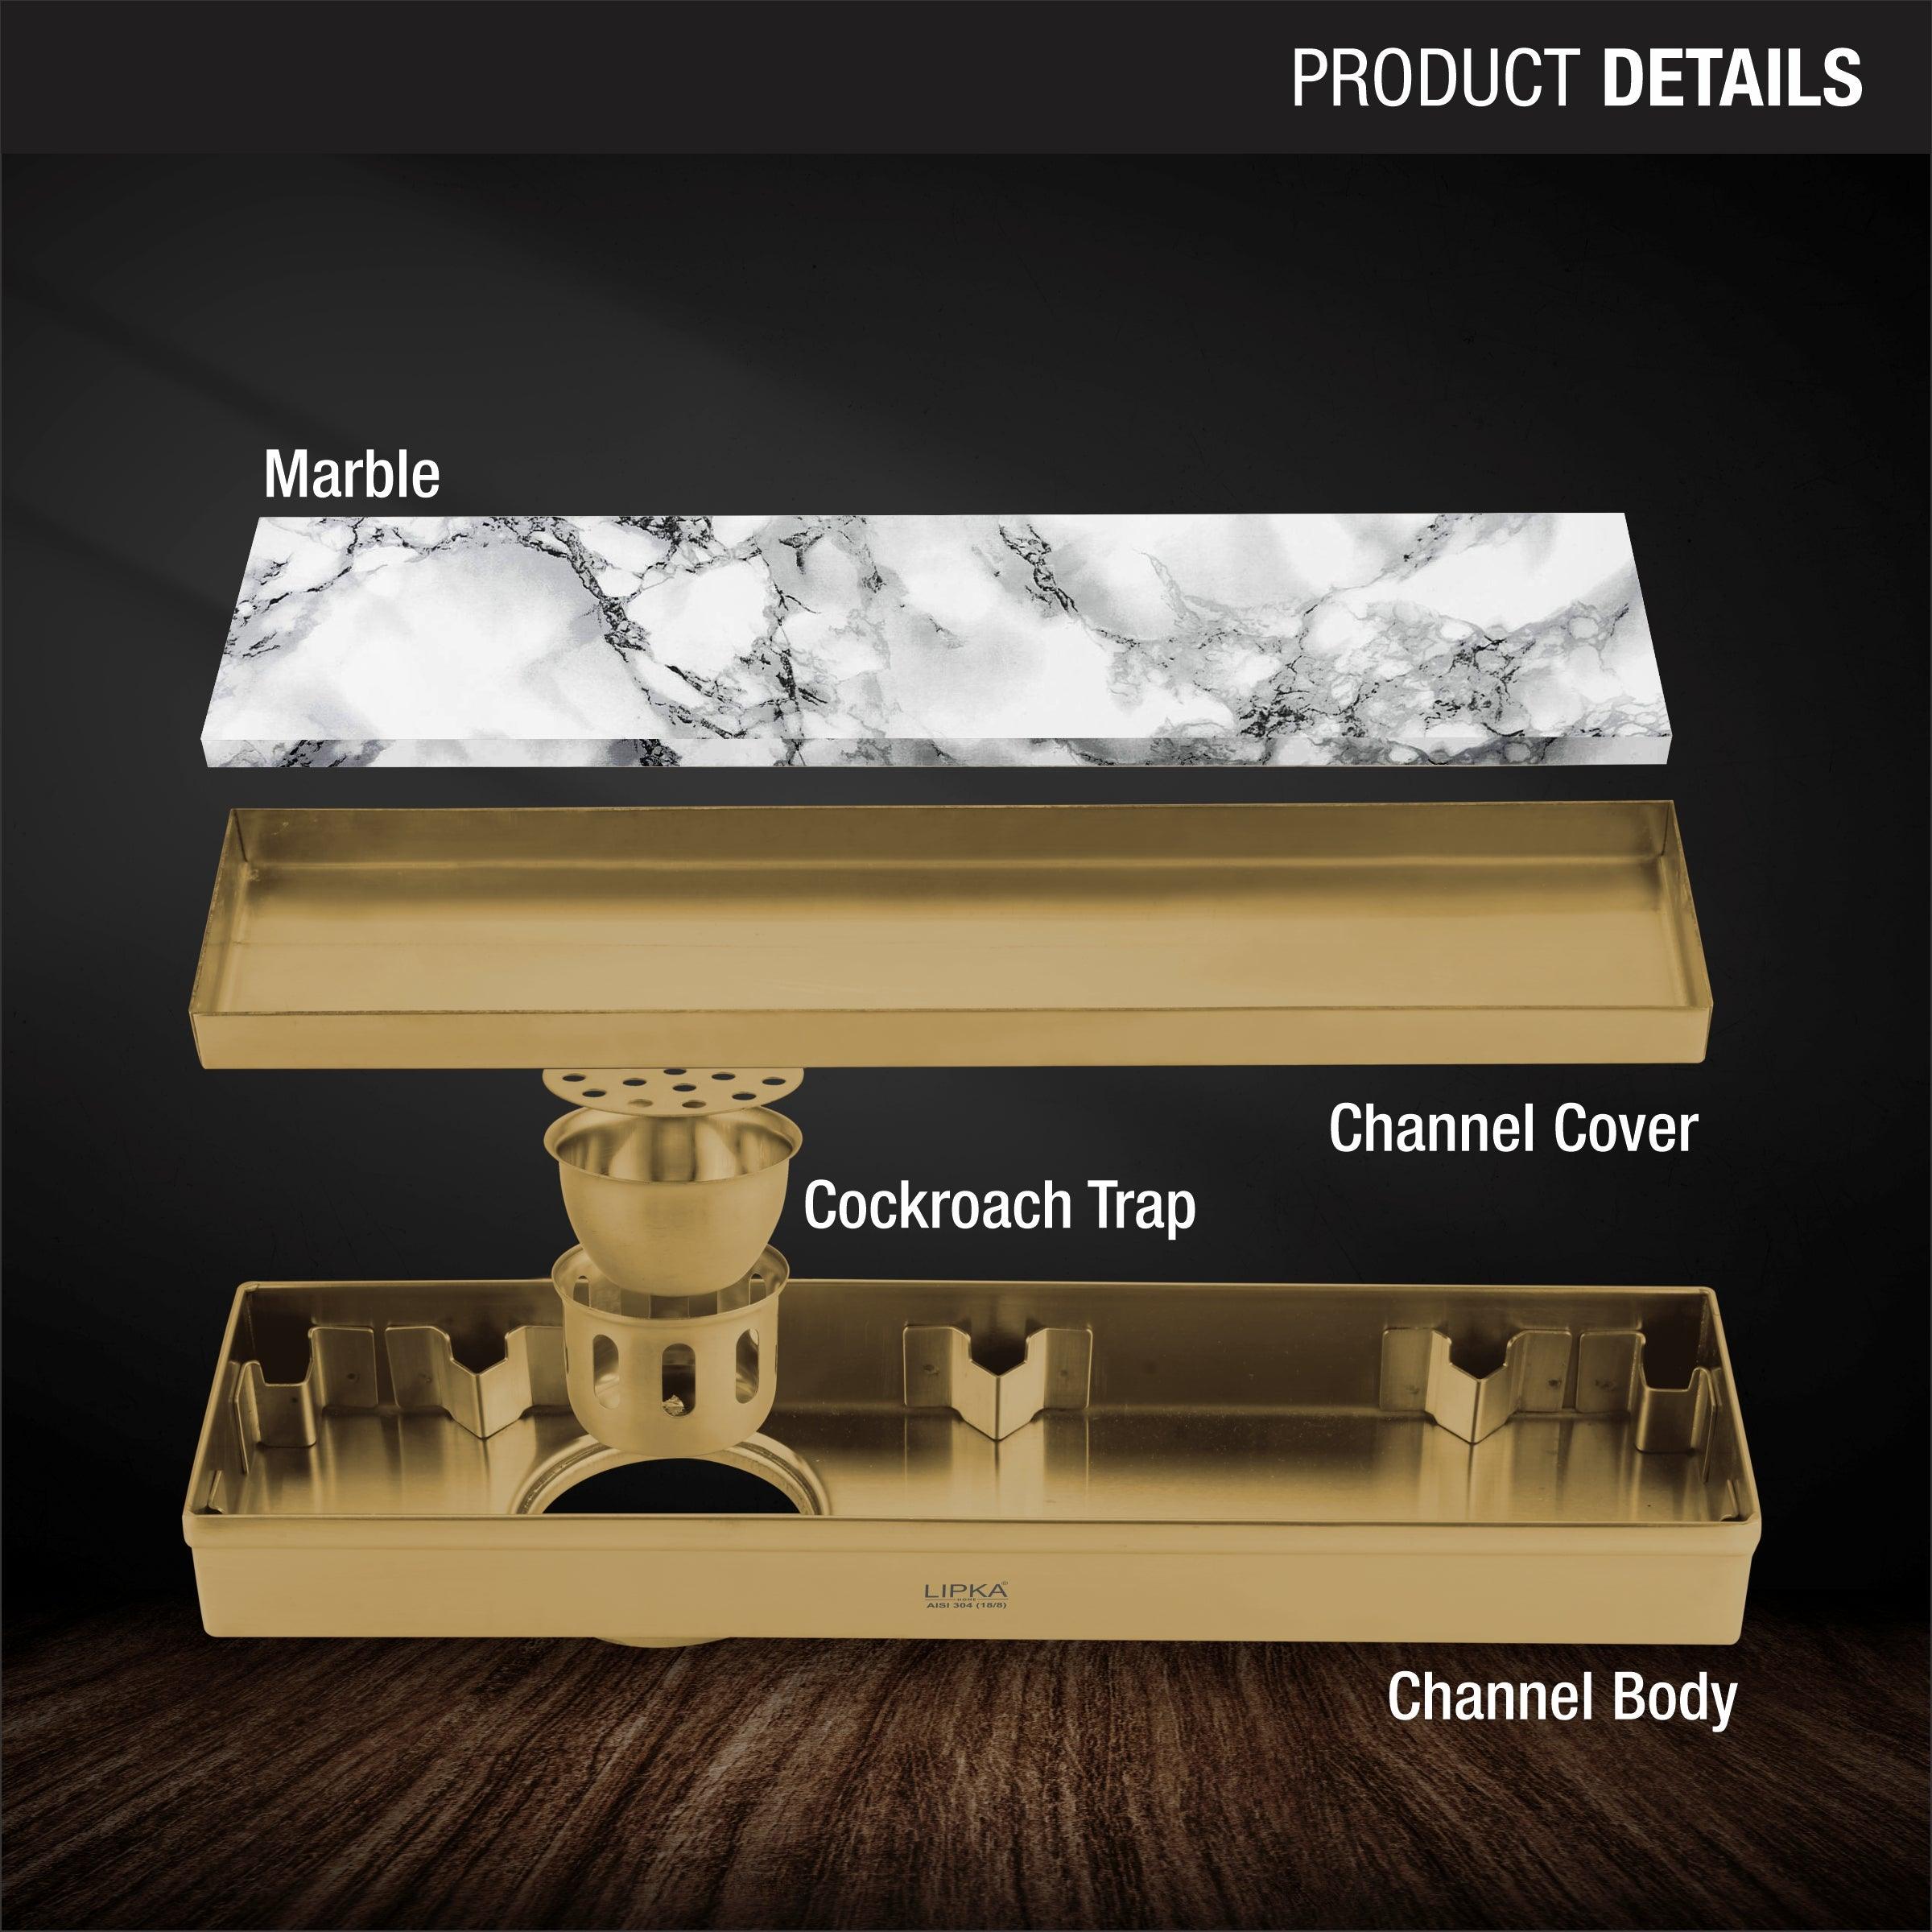 Marble Insert Shower Drain Channel - Yellow Gold (24 x 3 Inches) product details